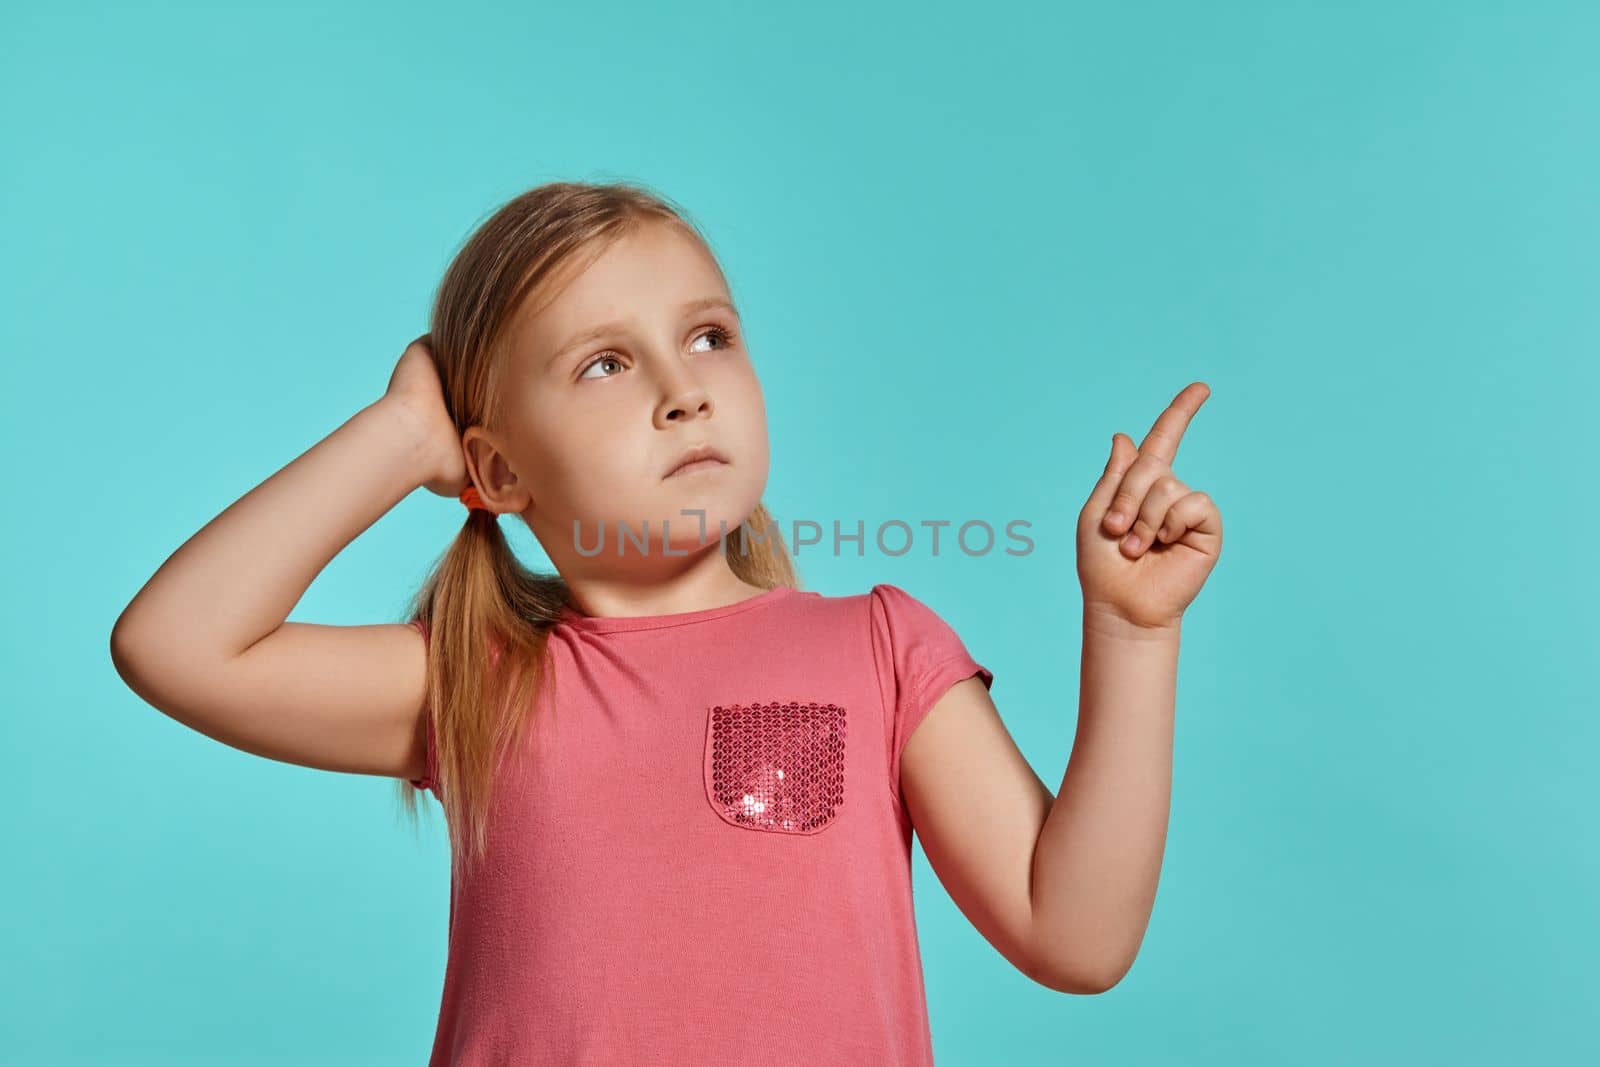 Close-up shot of a pretty blonde little female with two ponytails on her head, in a pink dress, pointing on something and looking up while posing against a blue background with copy space. Concept of a joyful childhood.